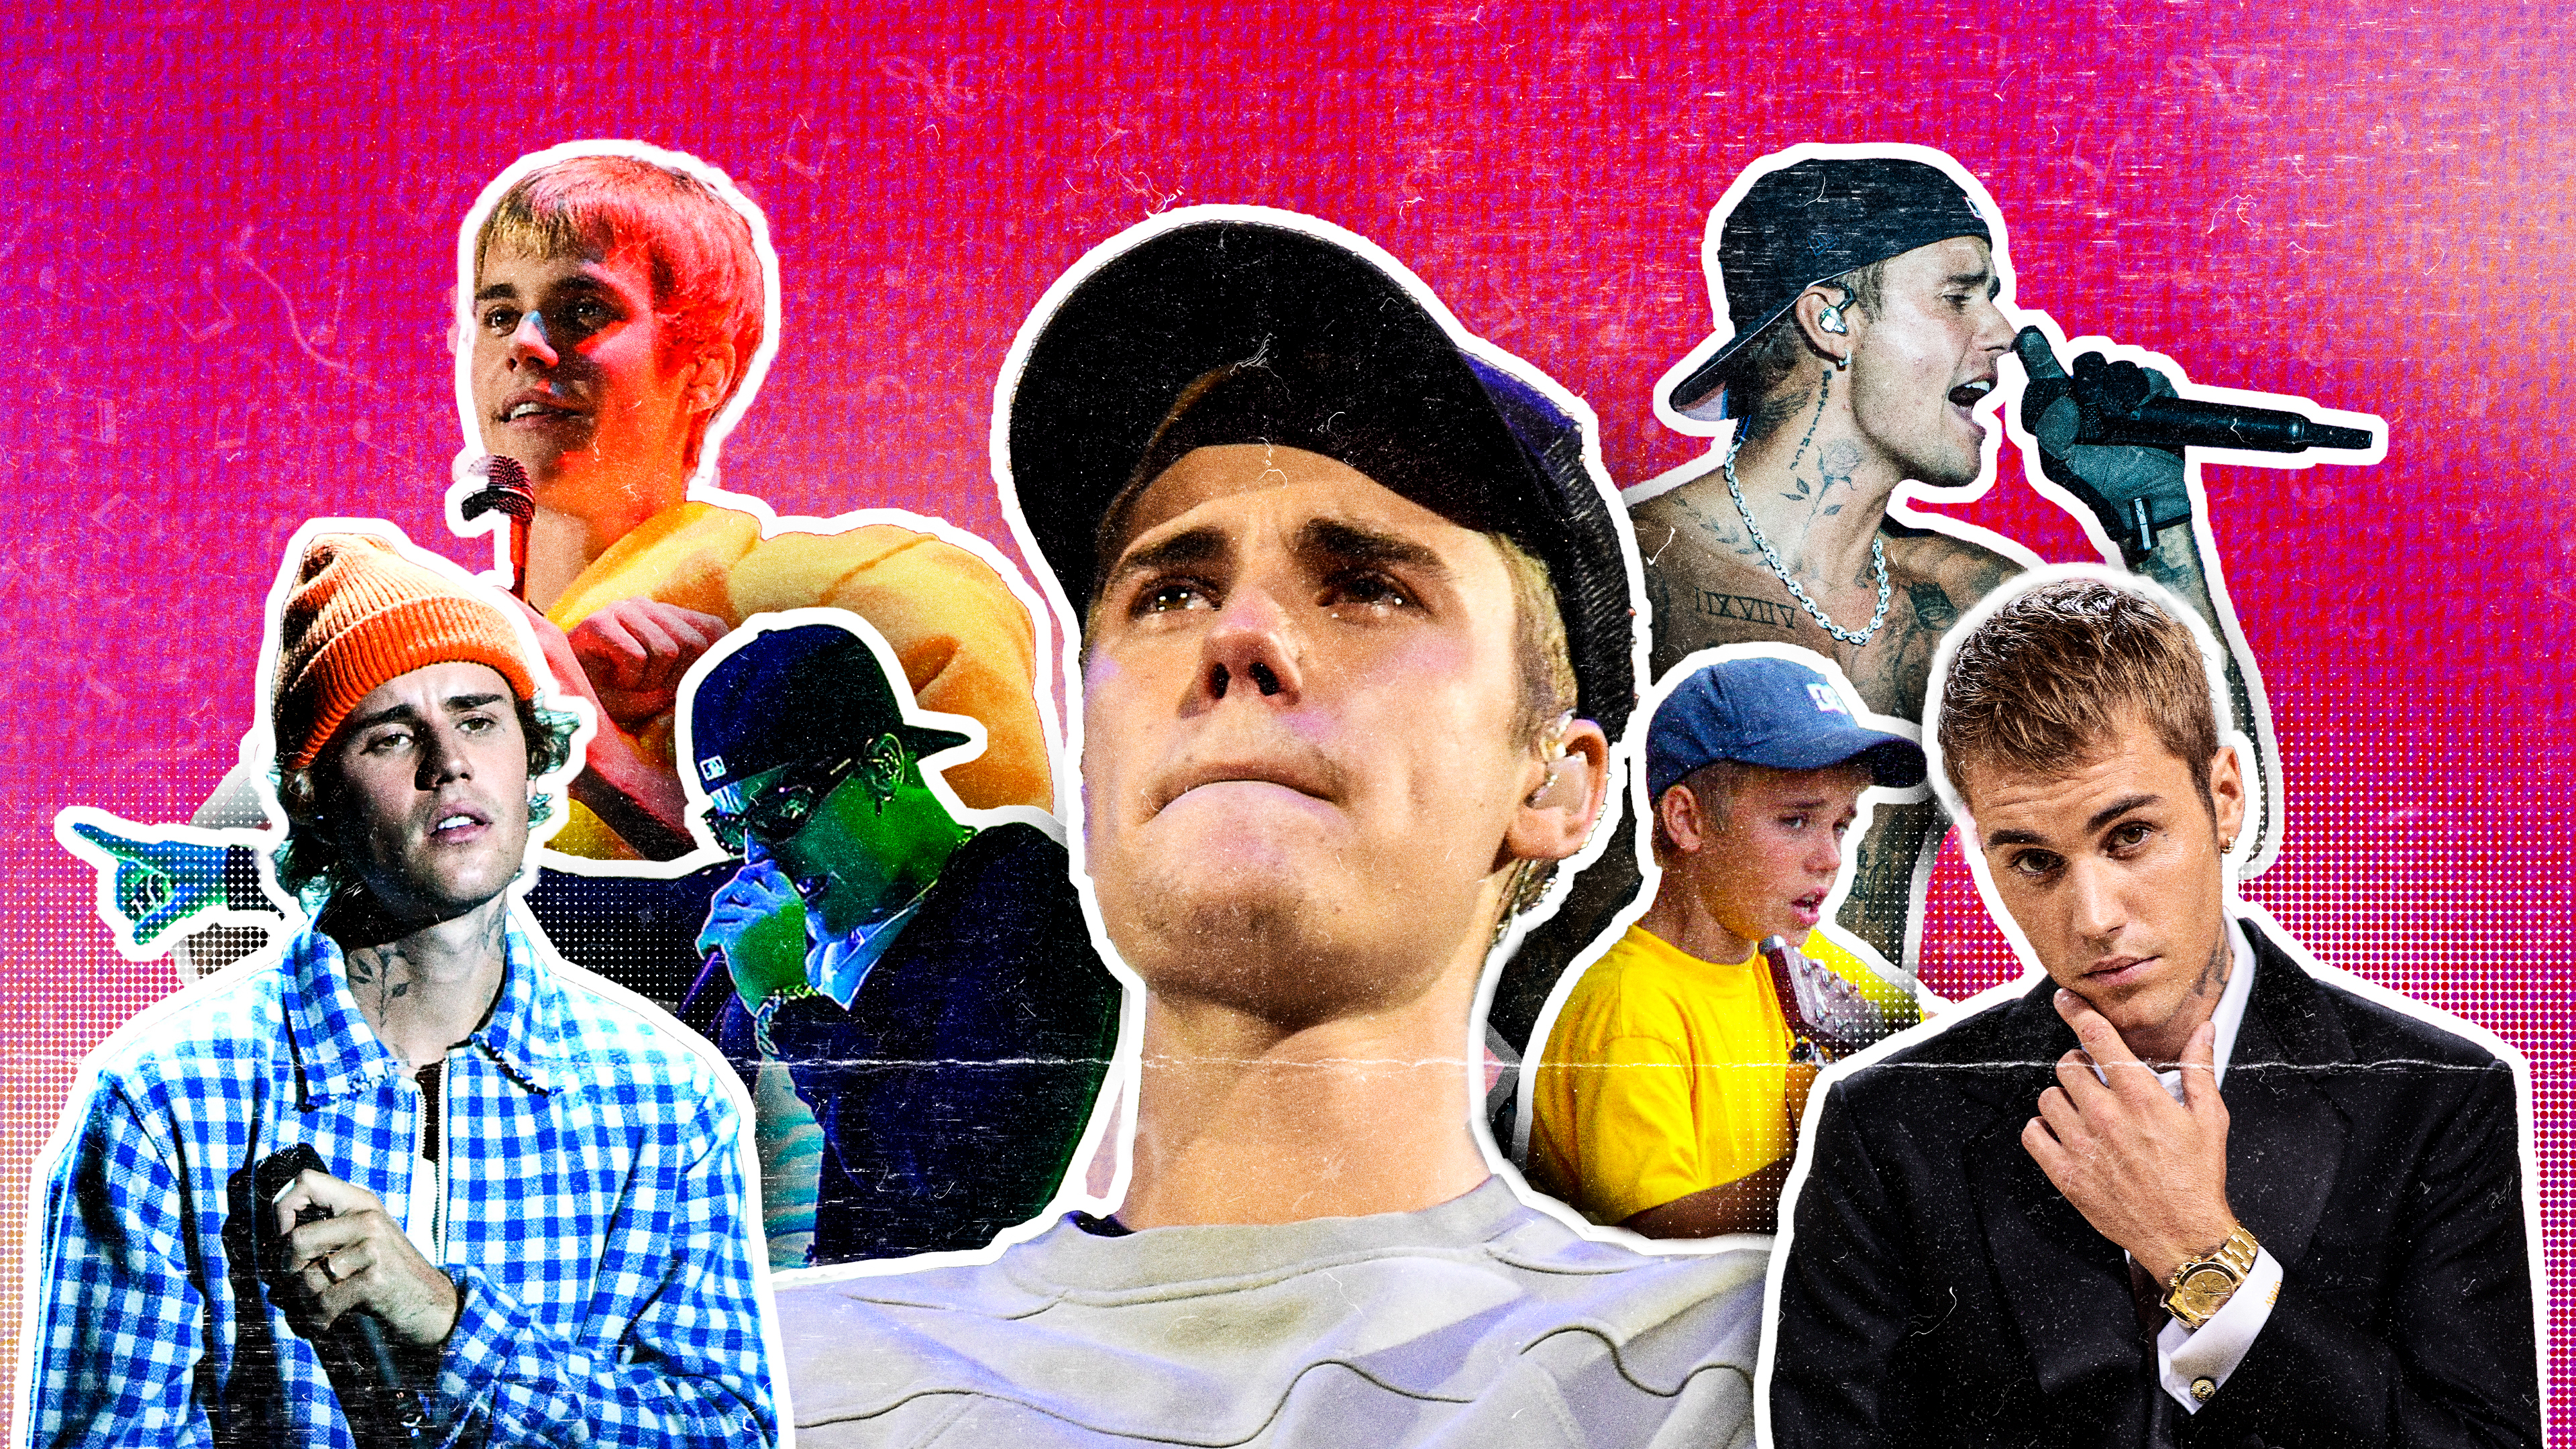 Justin Bieber Where Are You Now Featuring Skrillex and Diplo - Musing on  Music